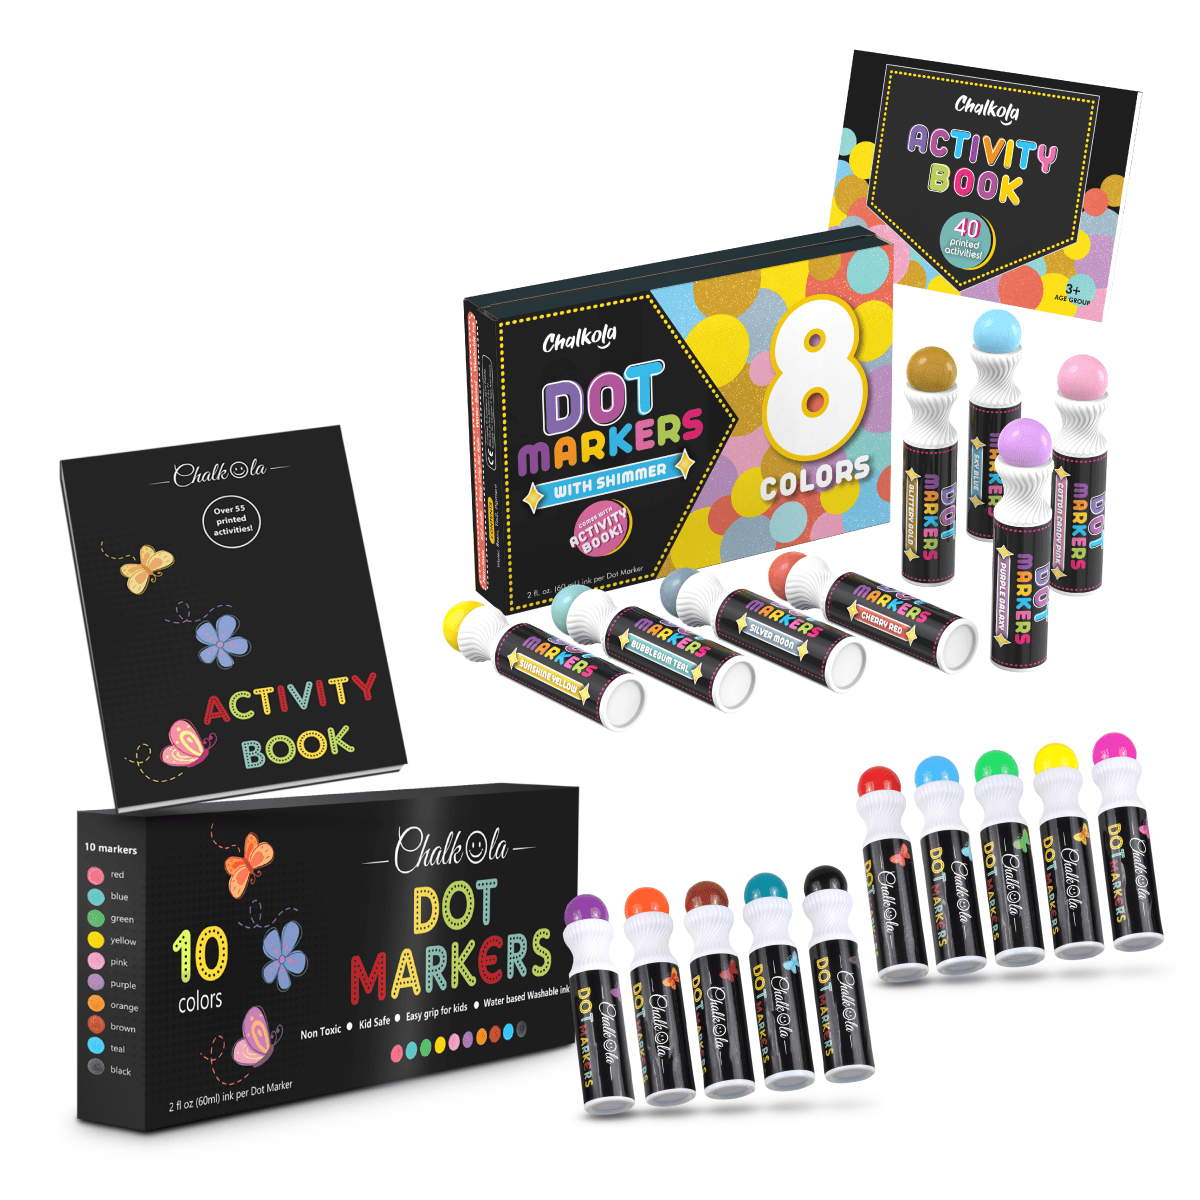 Chalkola Dot Markers for Creative Kids: The Best Dot Markers